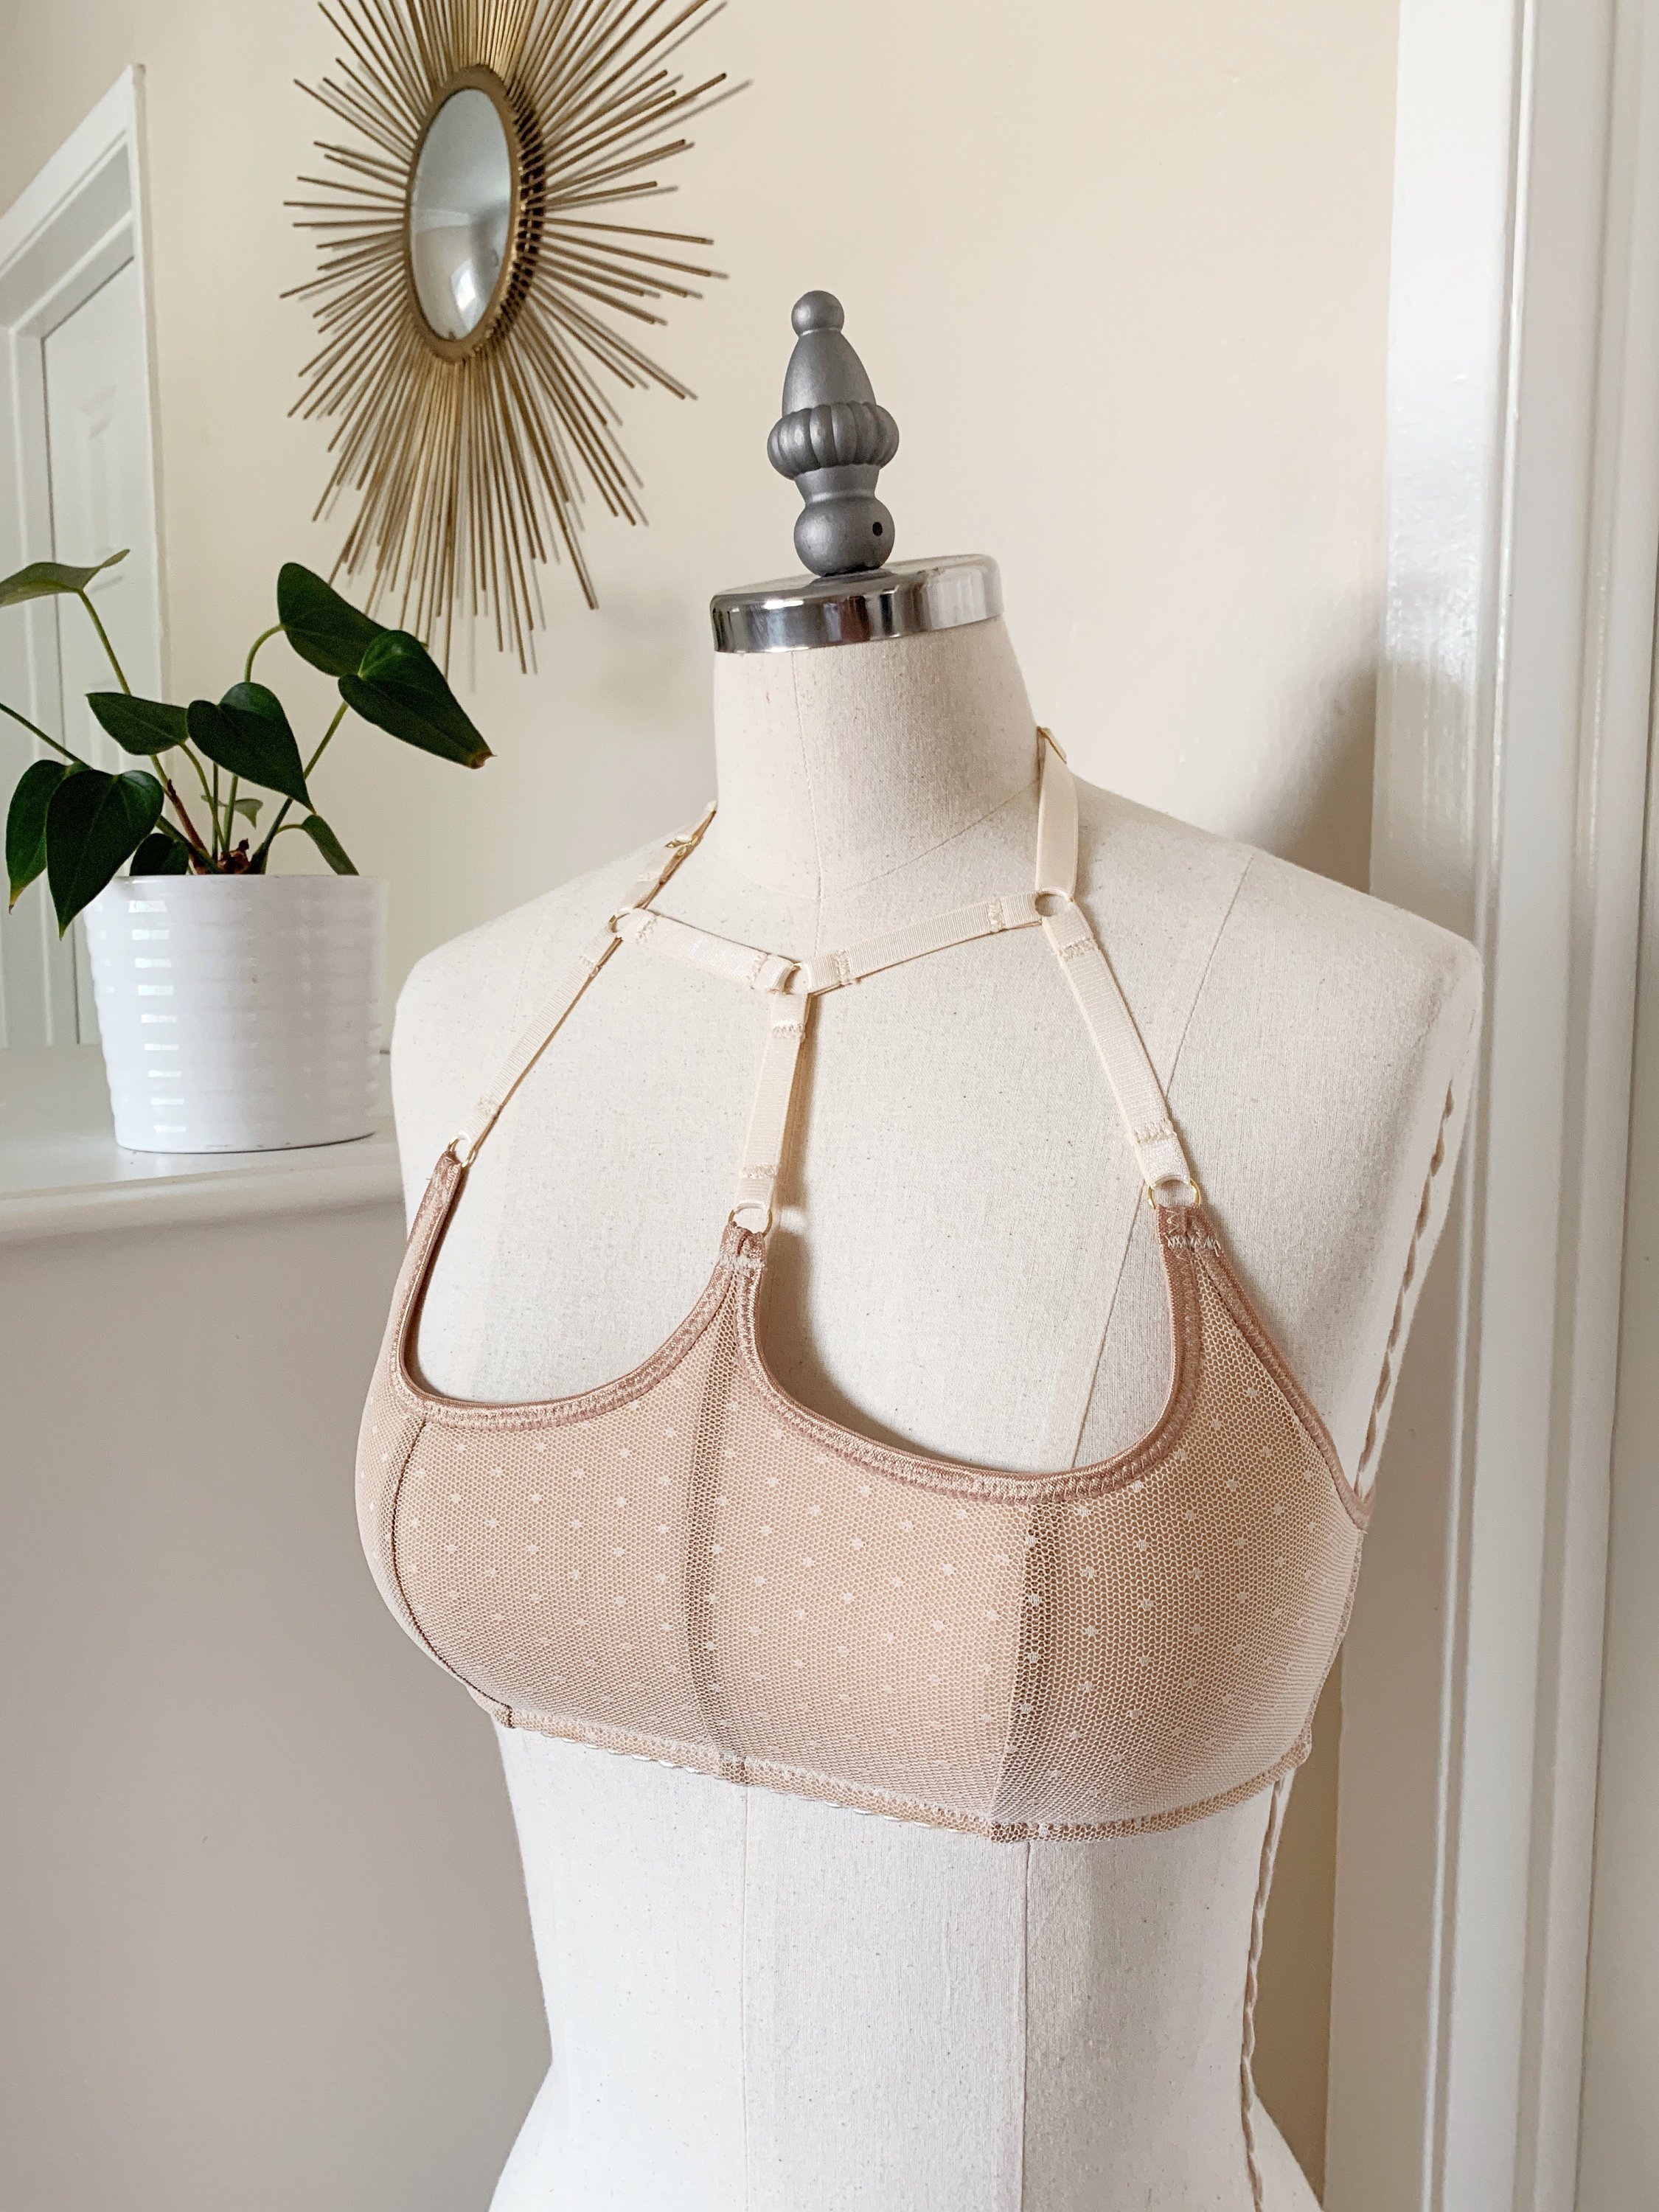 Four Bralette Sewing Patterns, Download Soft Bra Patterns, Lingerie Sewing  Pattern